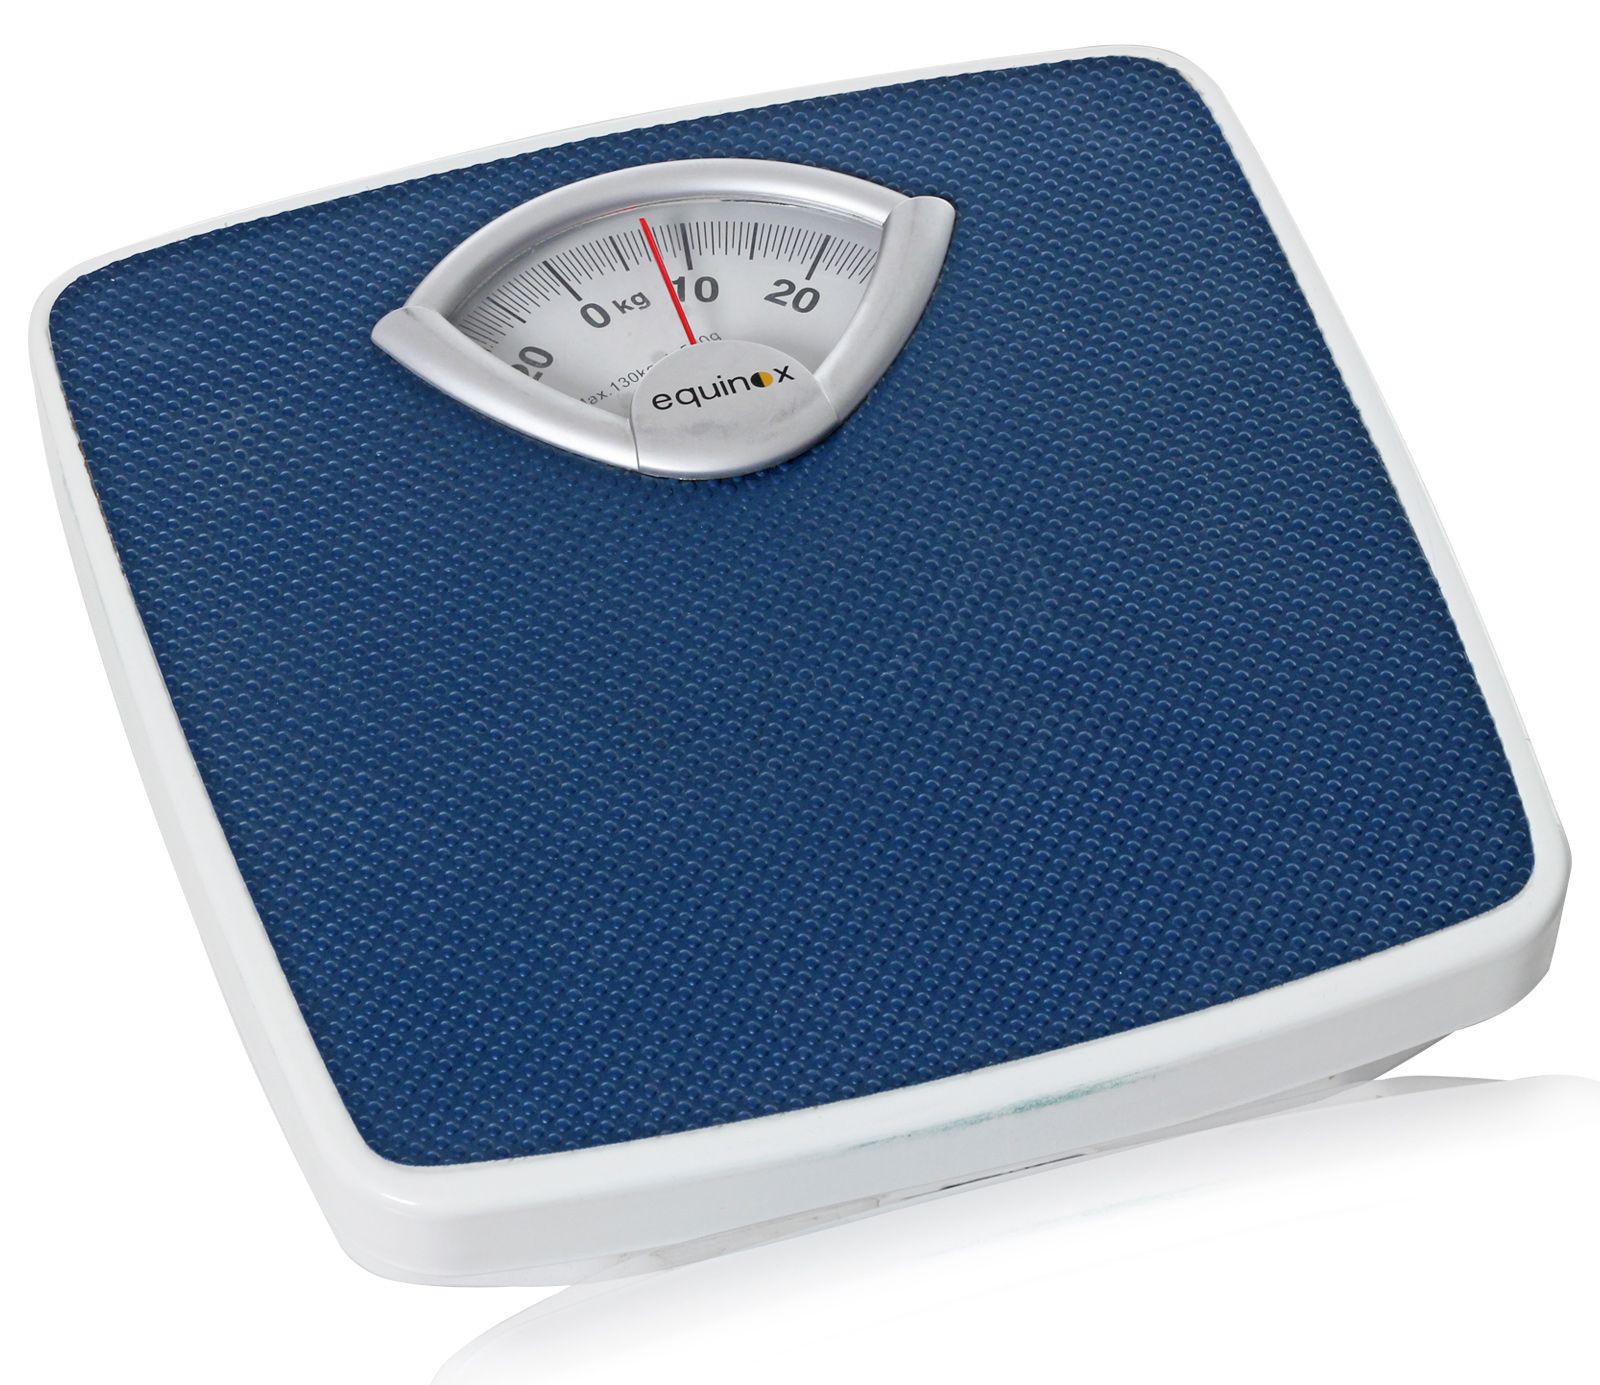 Benefits Of Having A Weighing Machine At Your Home | Sandeep ...